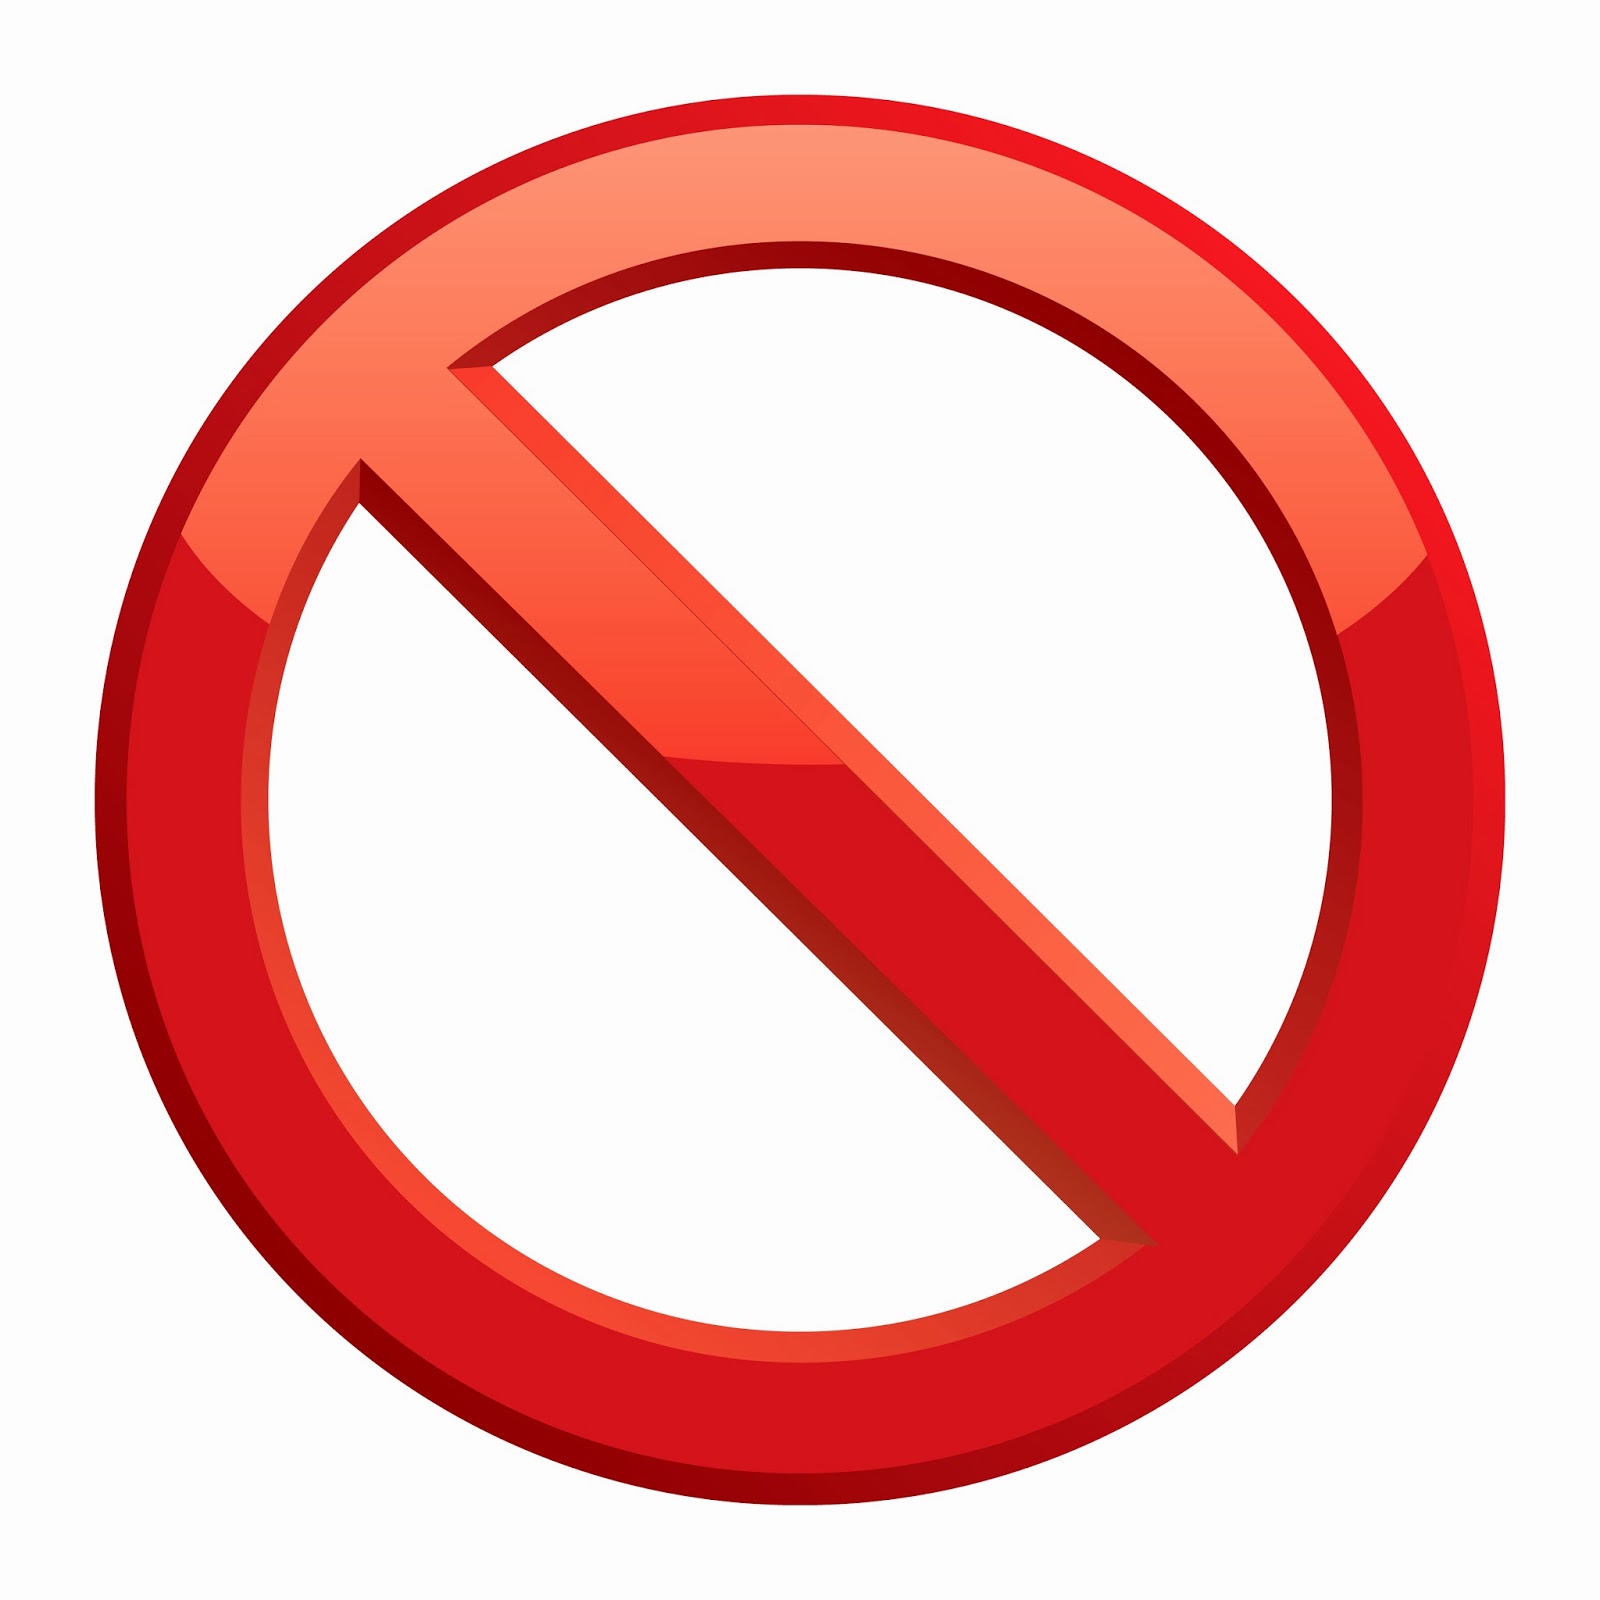 Just Say No Sign - ClipArt Best